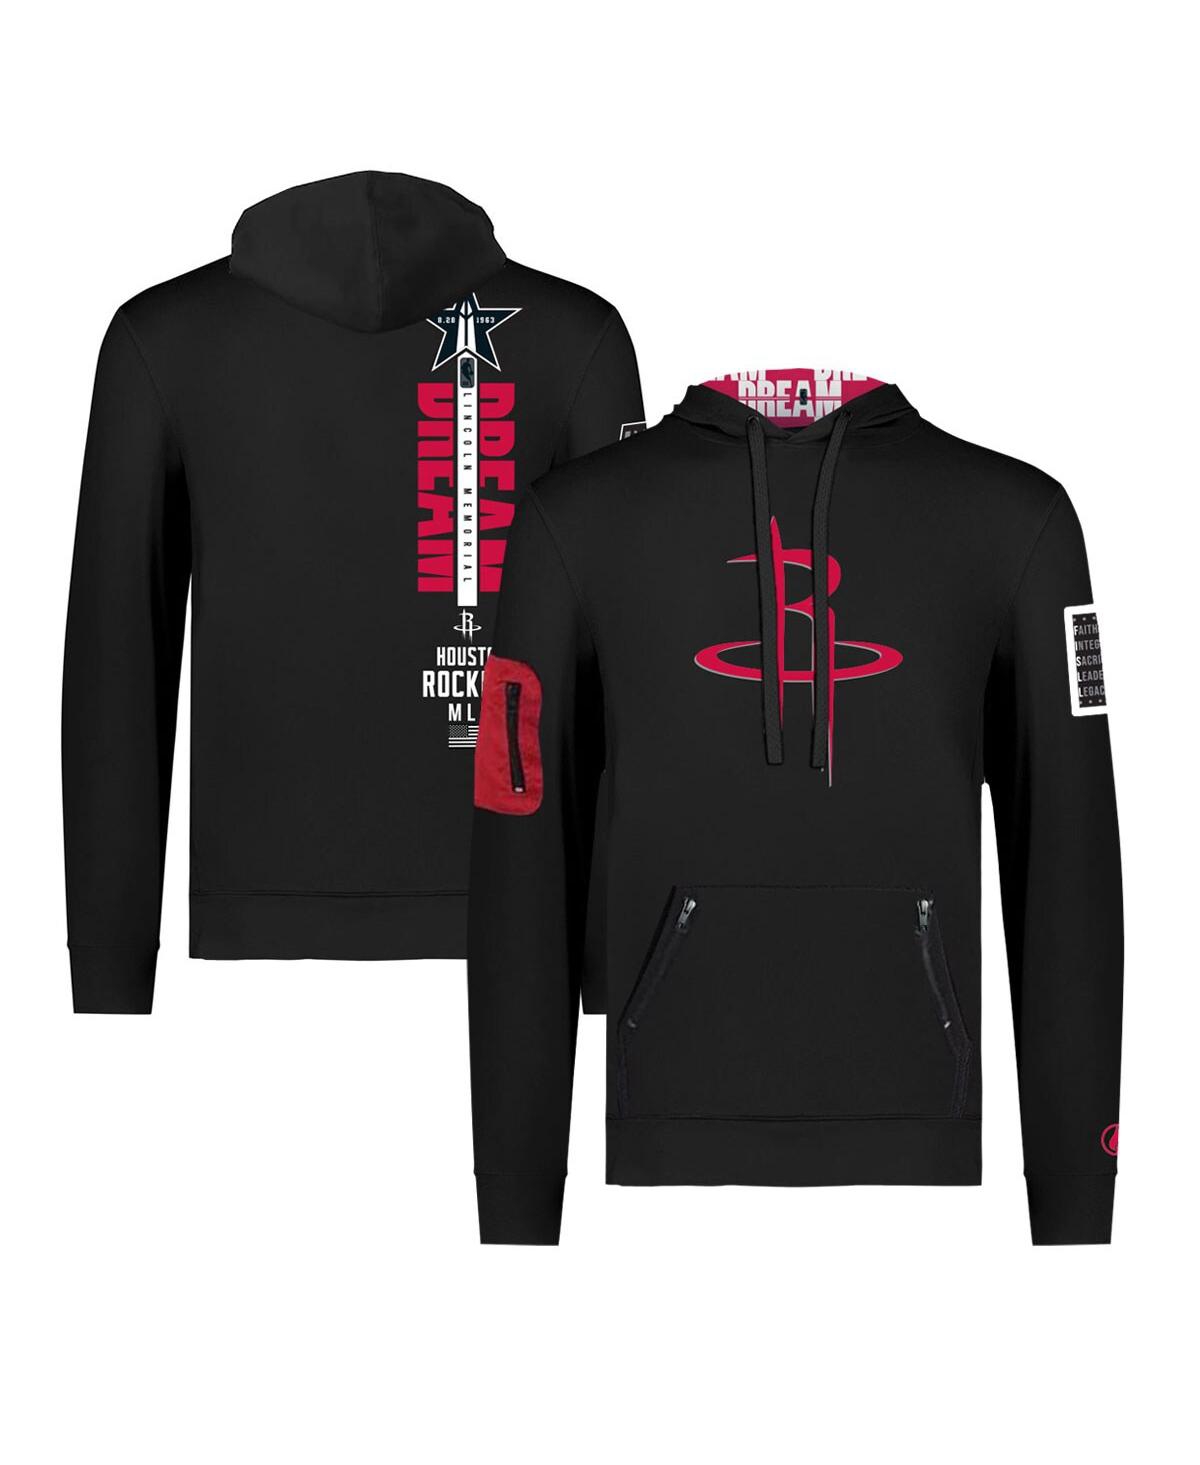 Men's and Women's Fisll x Black History Collection Black Houston Rockets Pullover Hoodie - Black